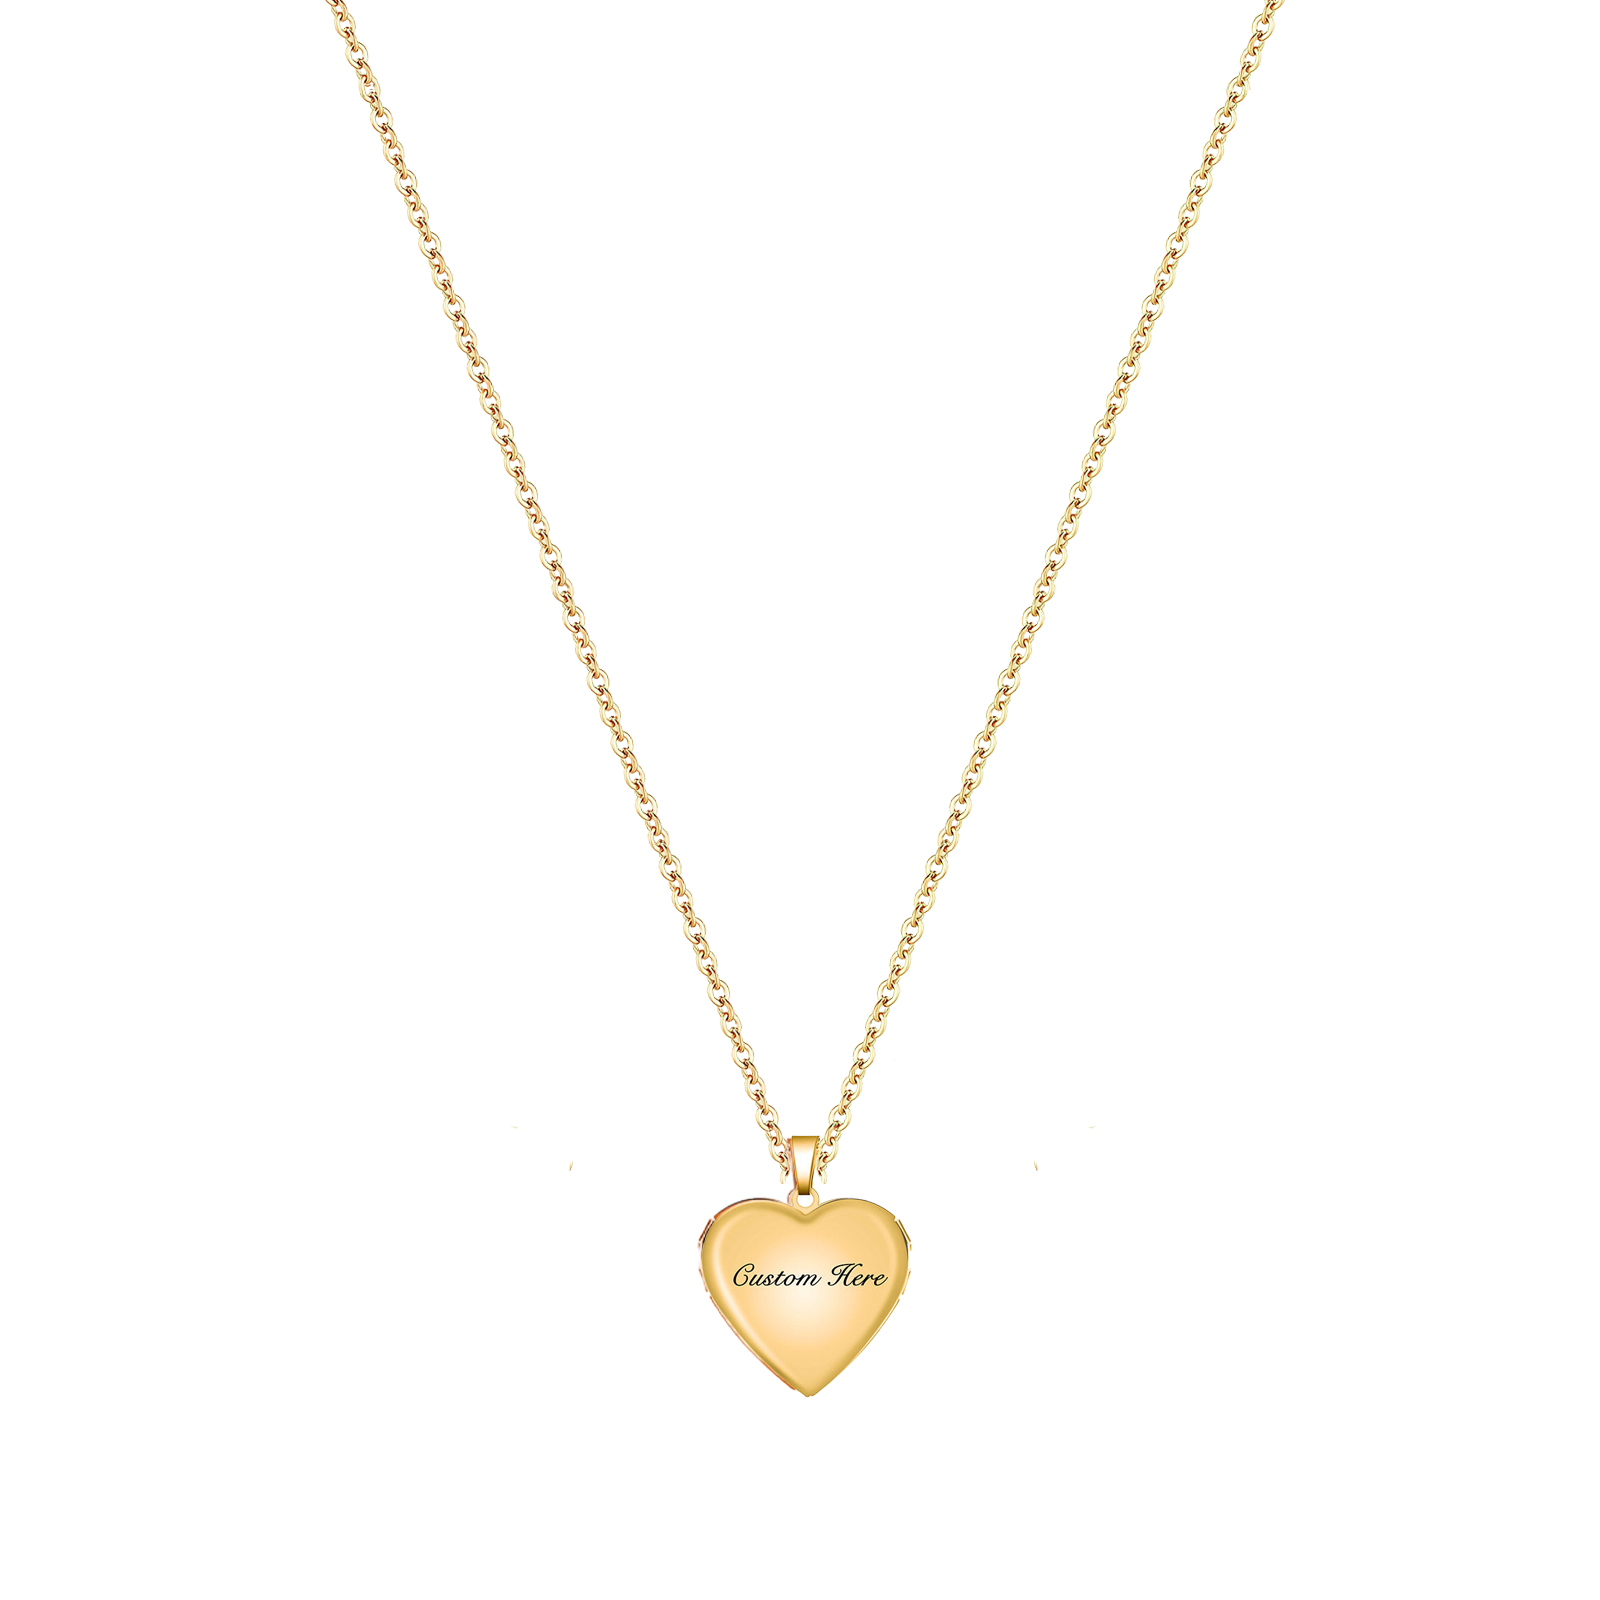 Personalized Heart Locket Necklace